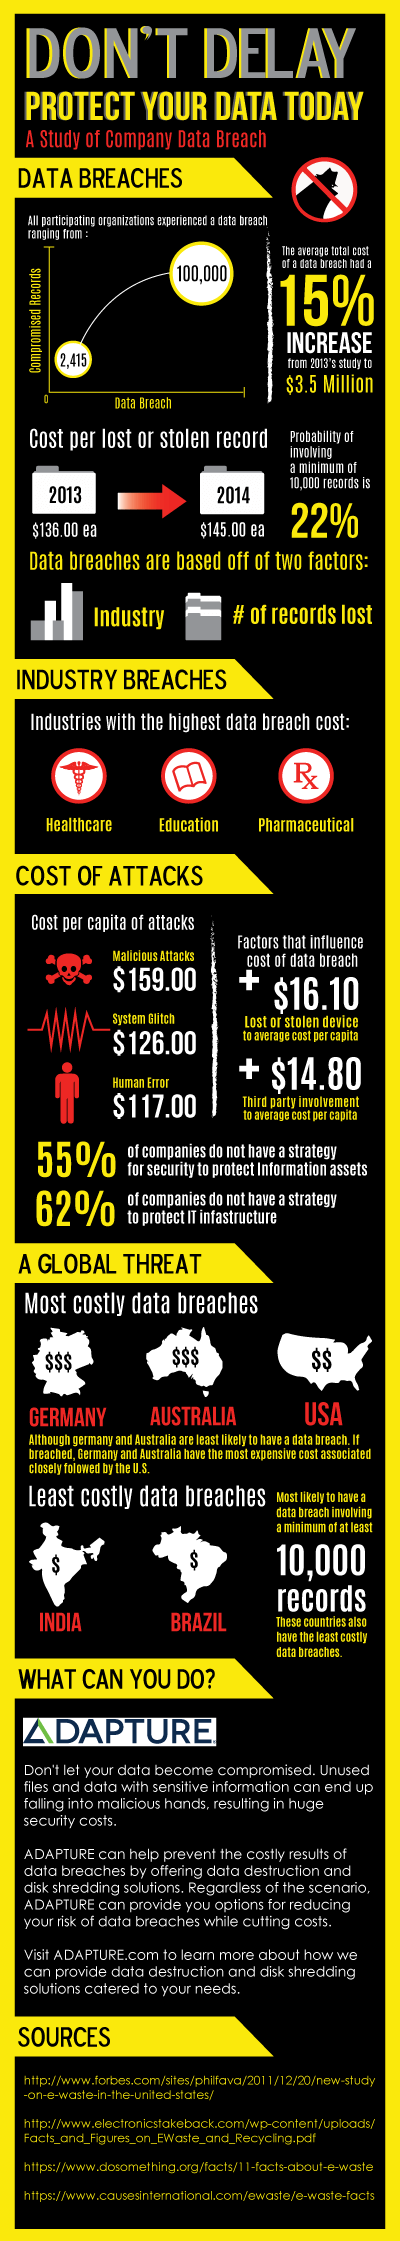 A 2014 Study of Company Data Breaches. Don’t delay protect your data today: a study of company data breach. All participating organizations experienced a data breach ranging from 2,415 to 100,000 compromised records. The average total cost of a data breach had a 15% increase from 2013’s study to $3.5 million. In 2013, the cost per lost or stolen record was $136 each. In 2014, the cost per lost or stolen record is $ 145. Probability of a data breach involving a minimum of 10,000 records is 22%